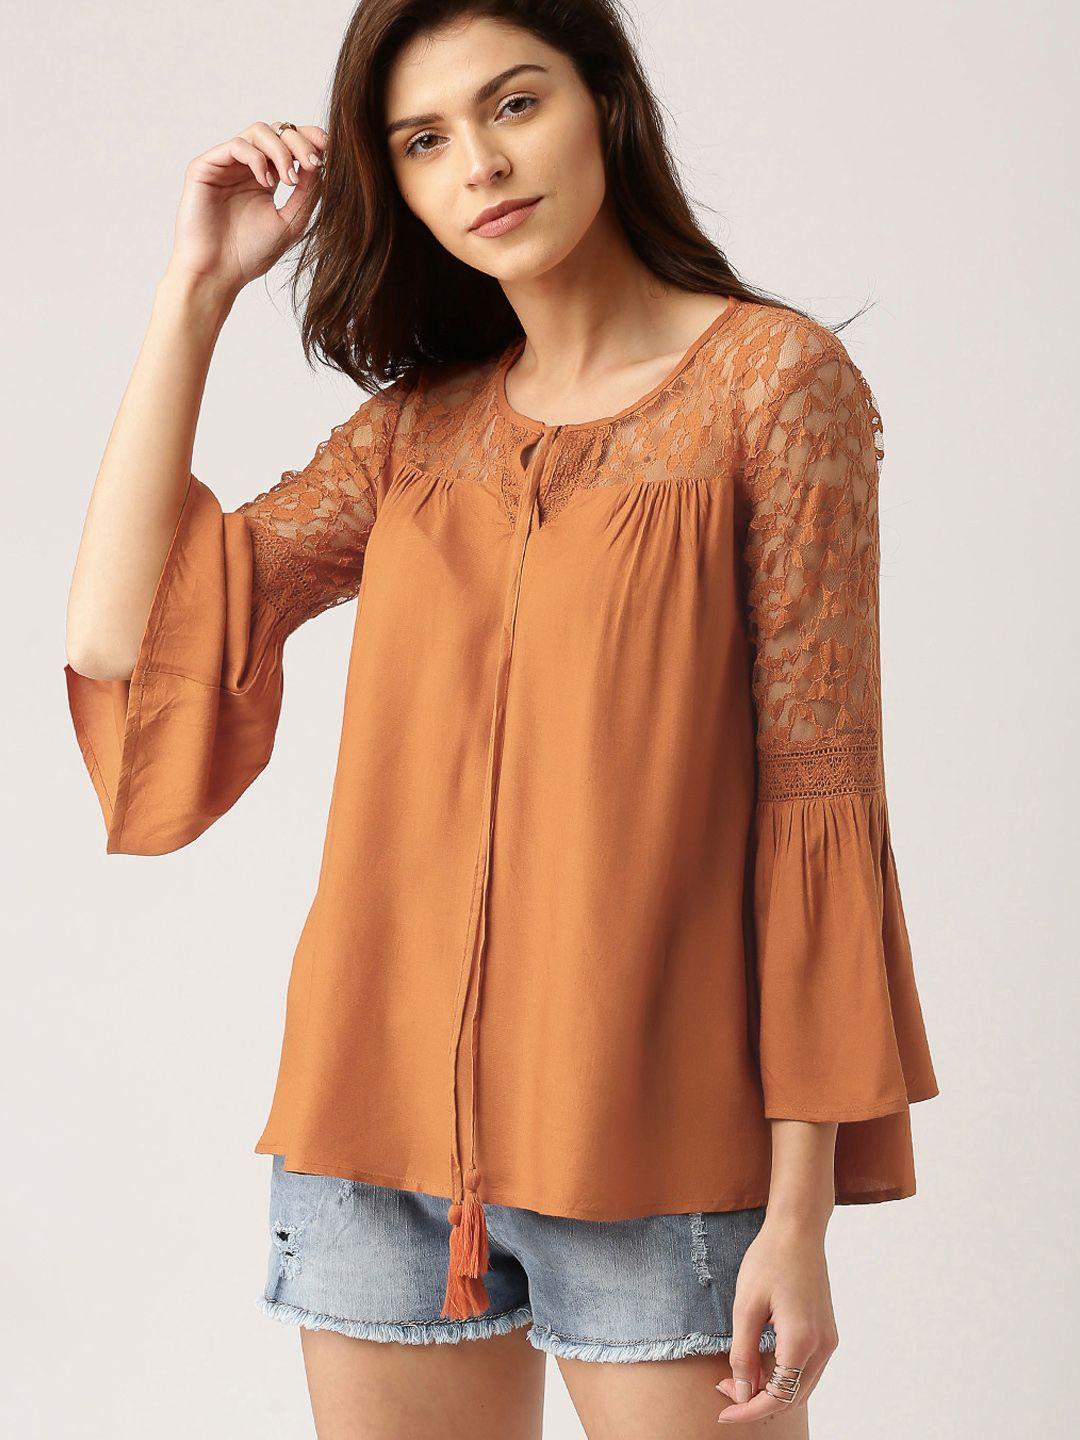 all-about-you-women-brown-lace-detail-a-line-top